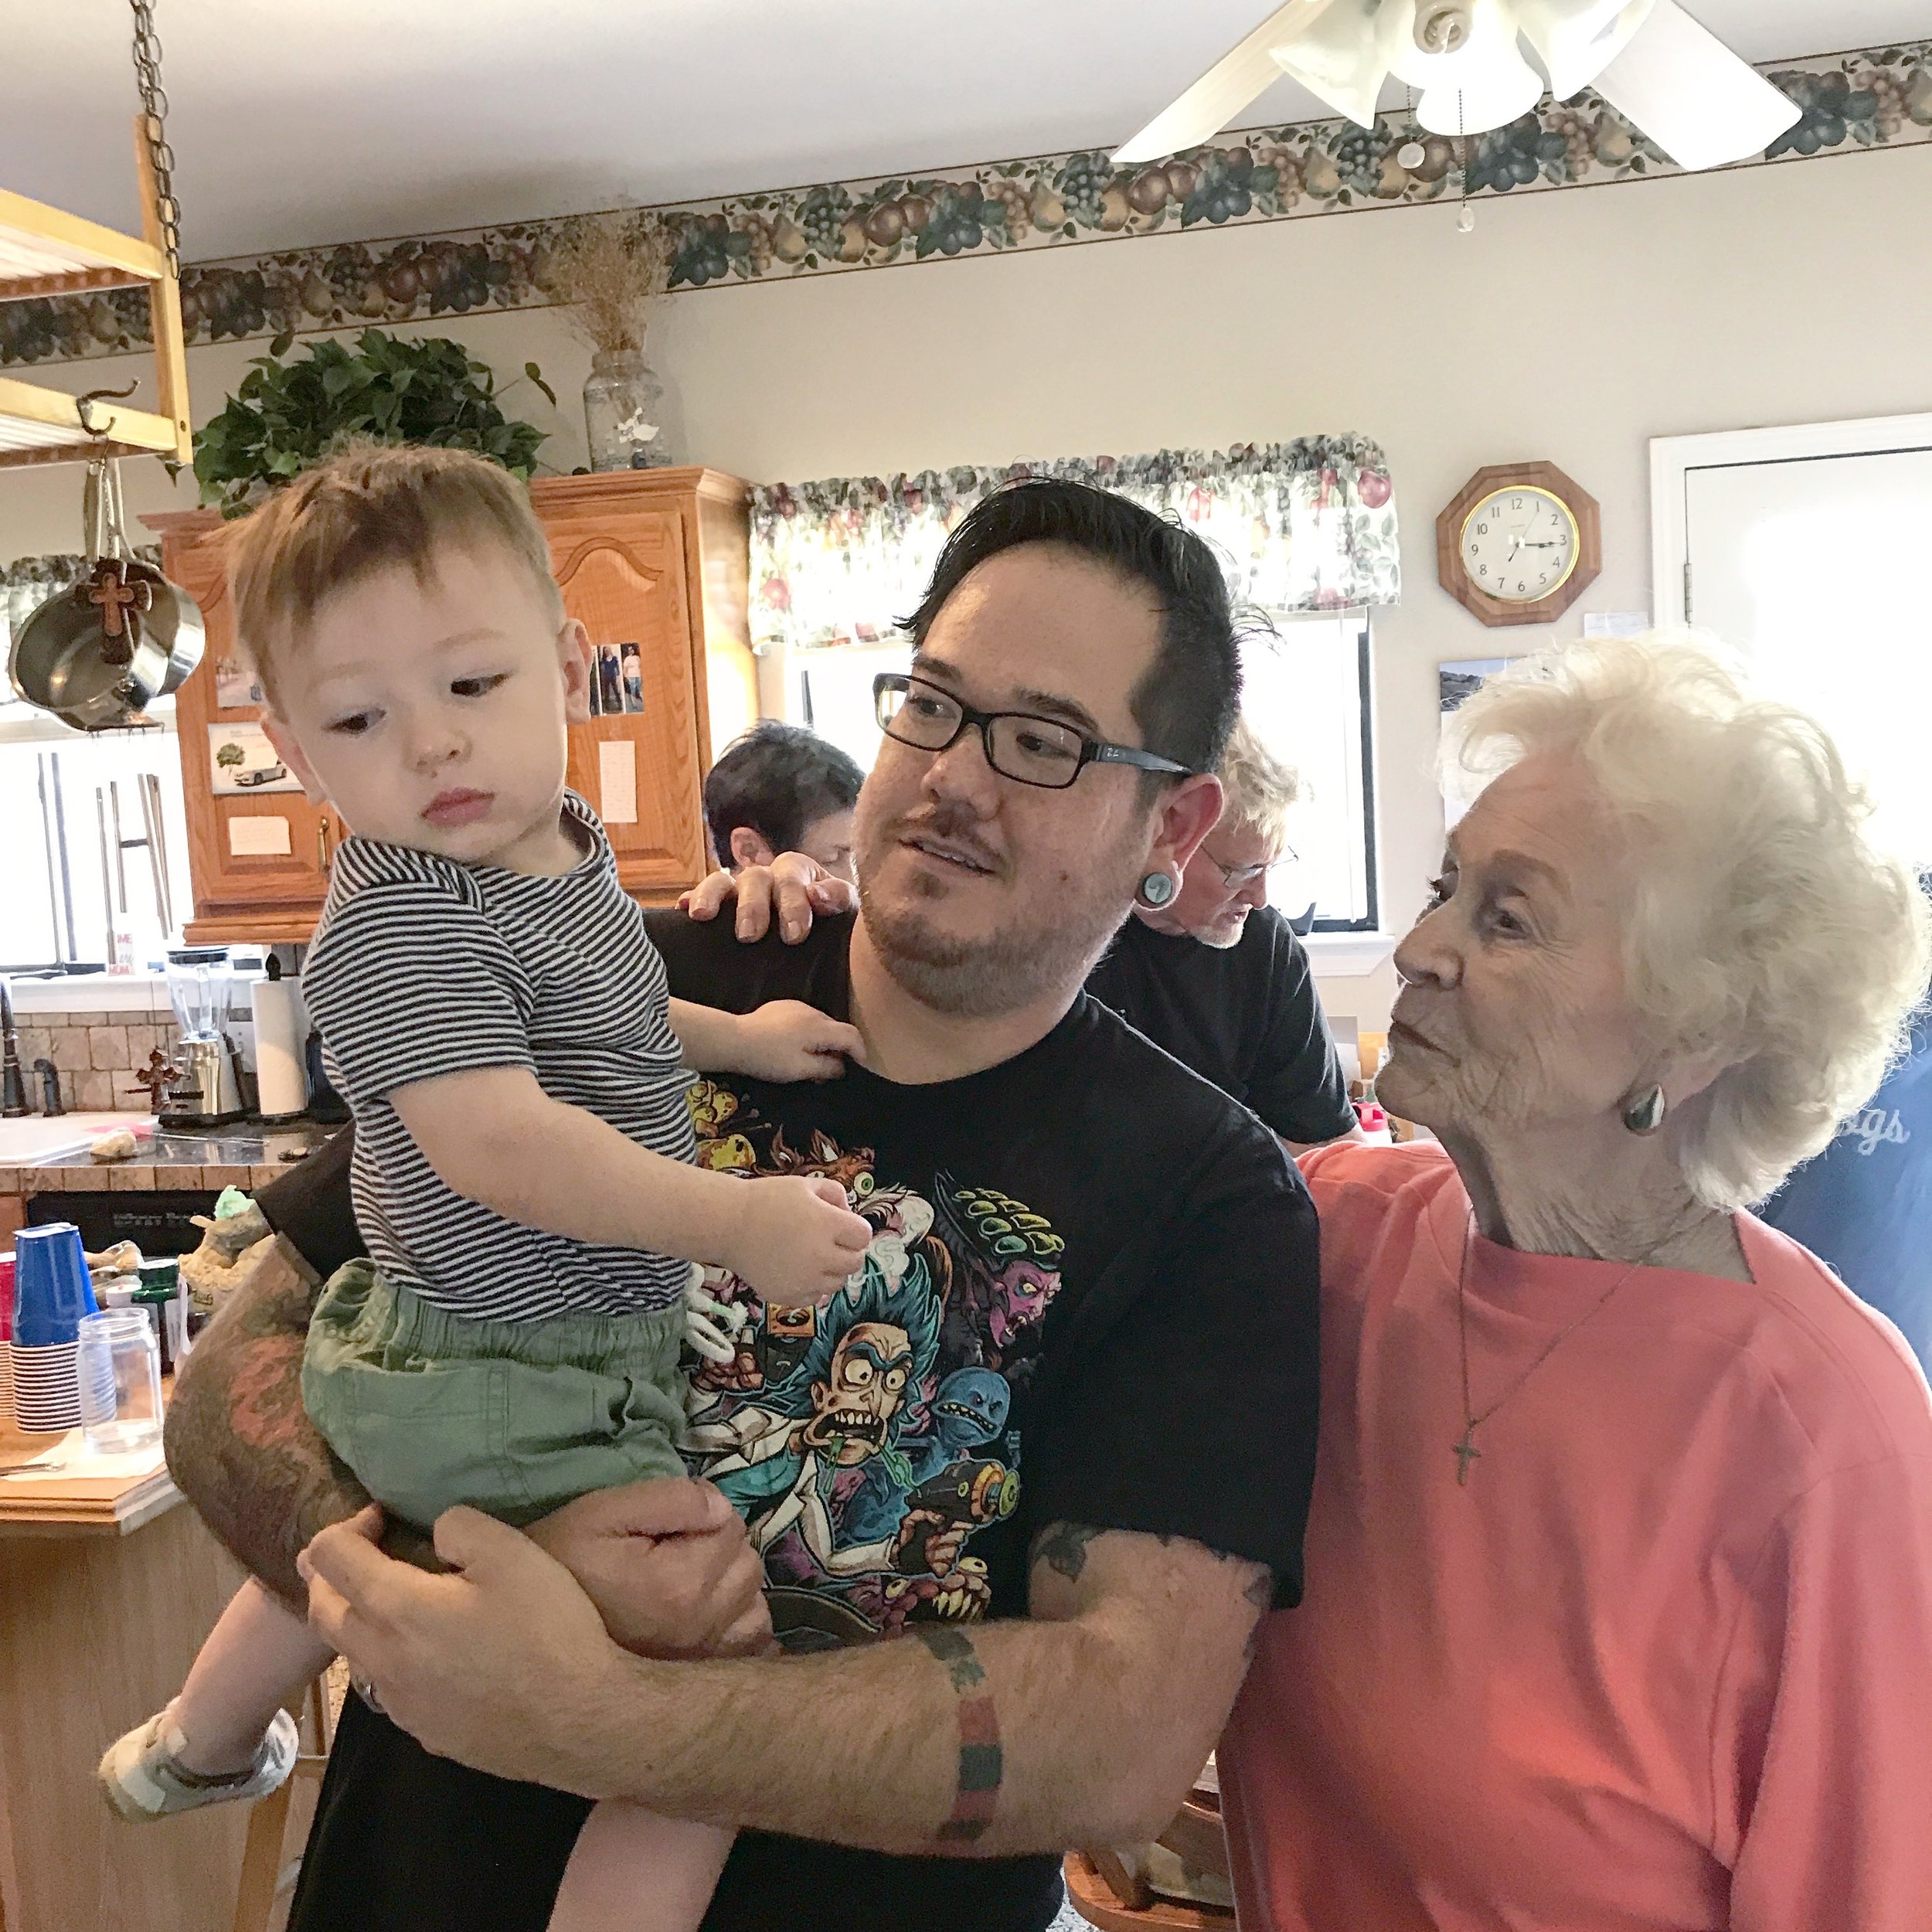 Great-Grandma meeting the littlest turd for the first time.